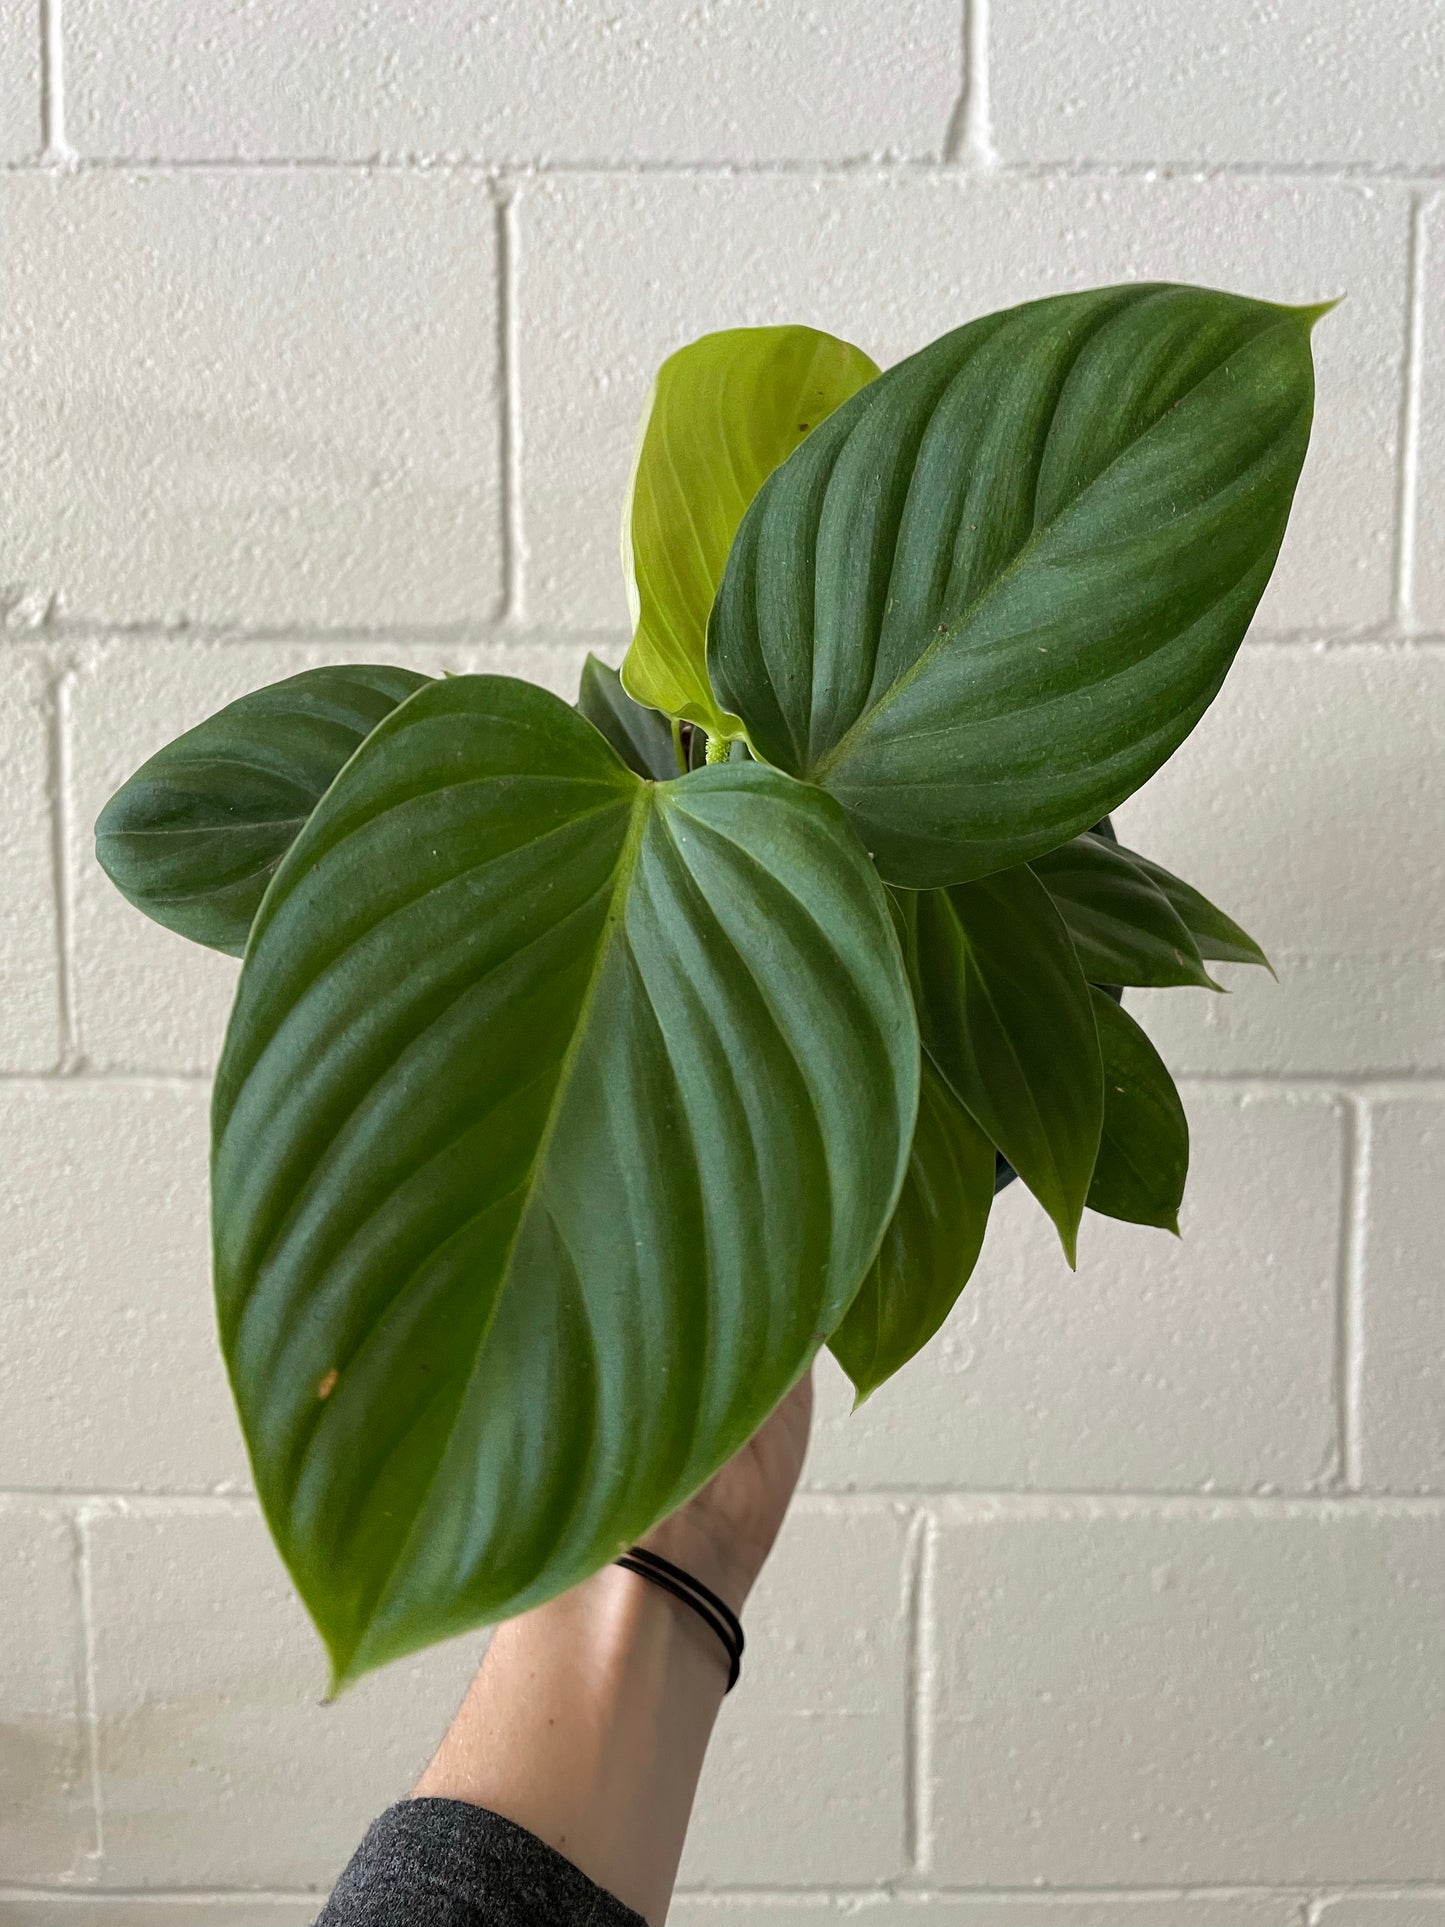 Philodendron Fuzzy petiole (Philodendron Nangaritense) 4-6"